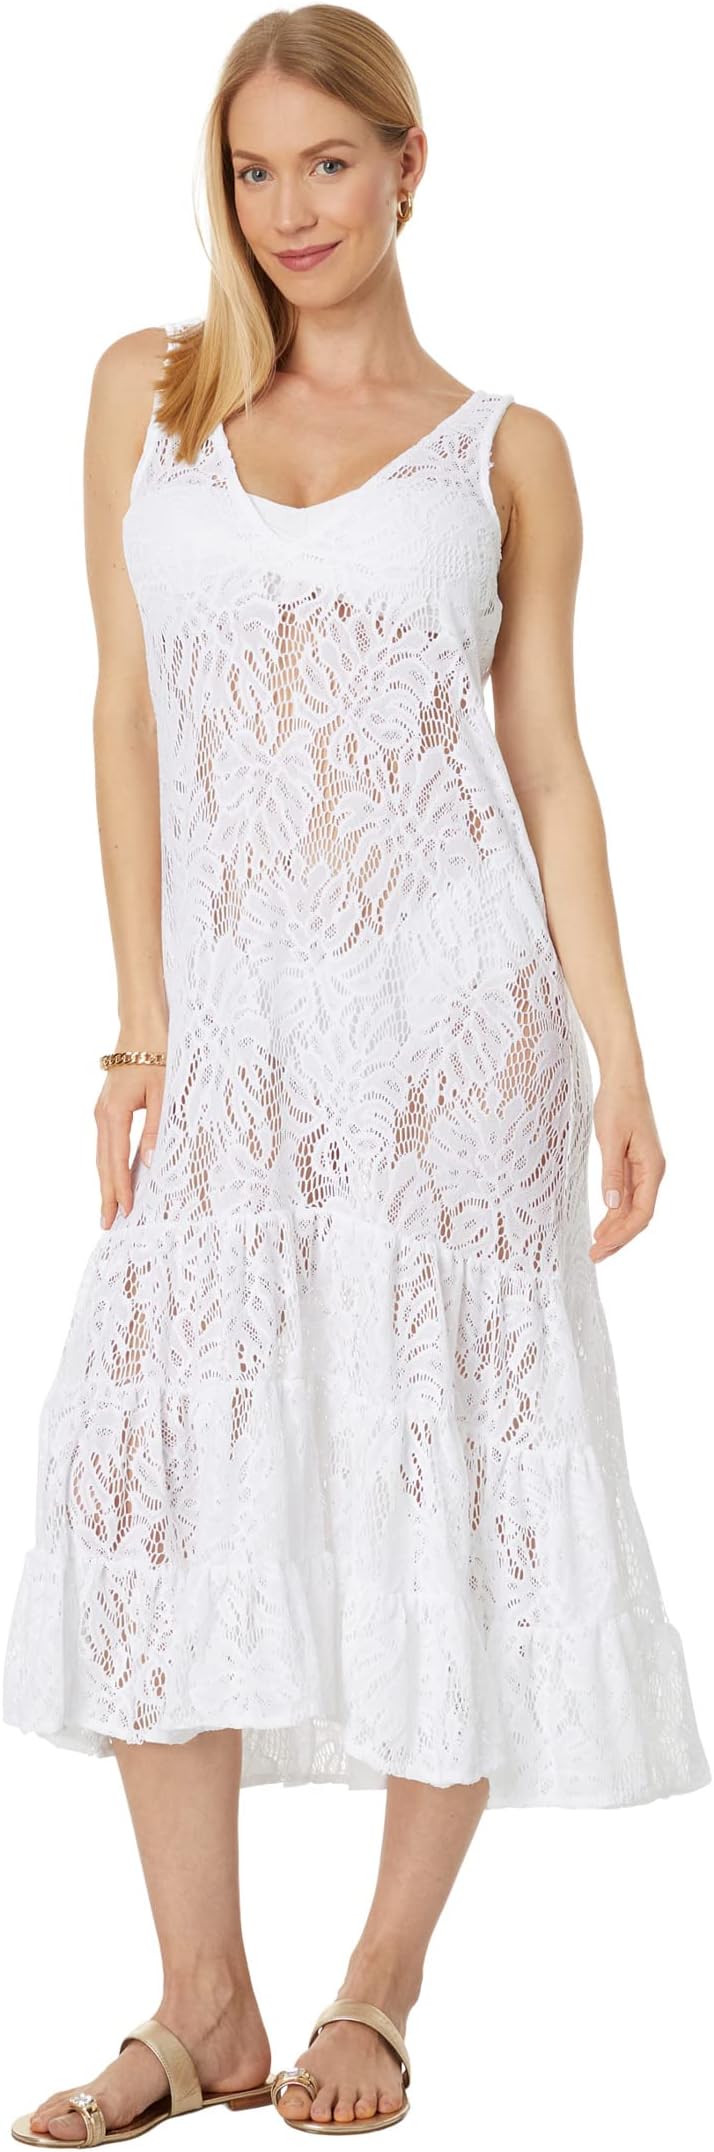 Накидка Finnley Lace Cover-Up Lilly Pulitzer, цвет Resort White Paradise Found Lace paradise resort hotel